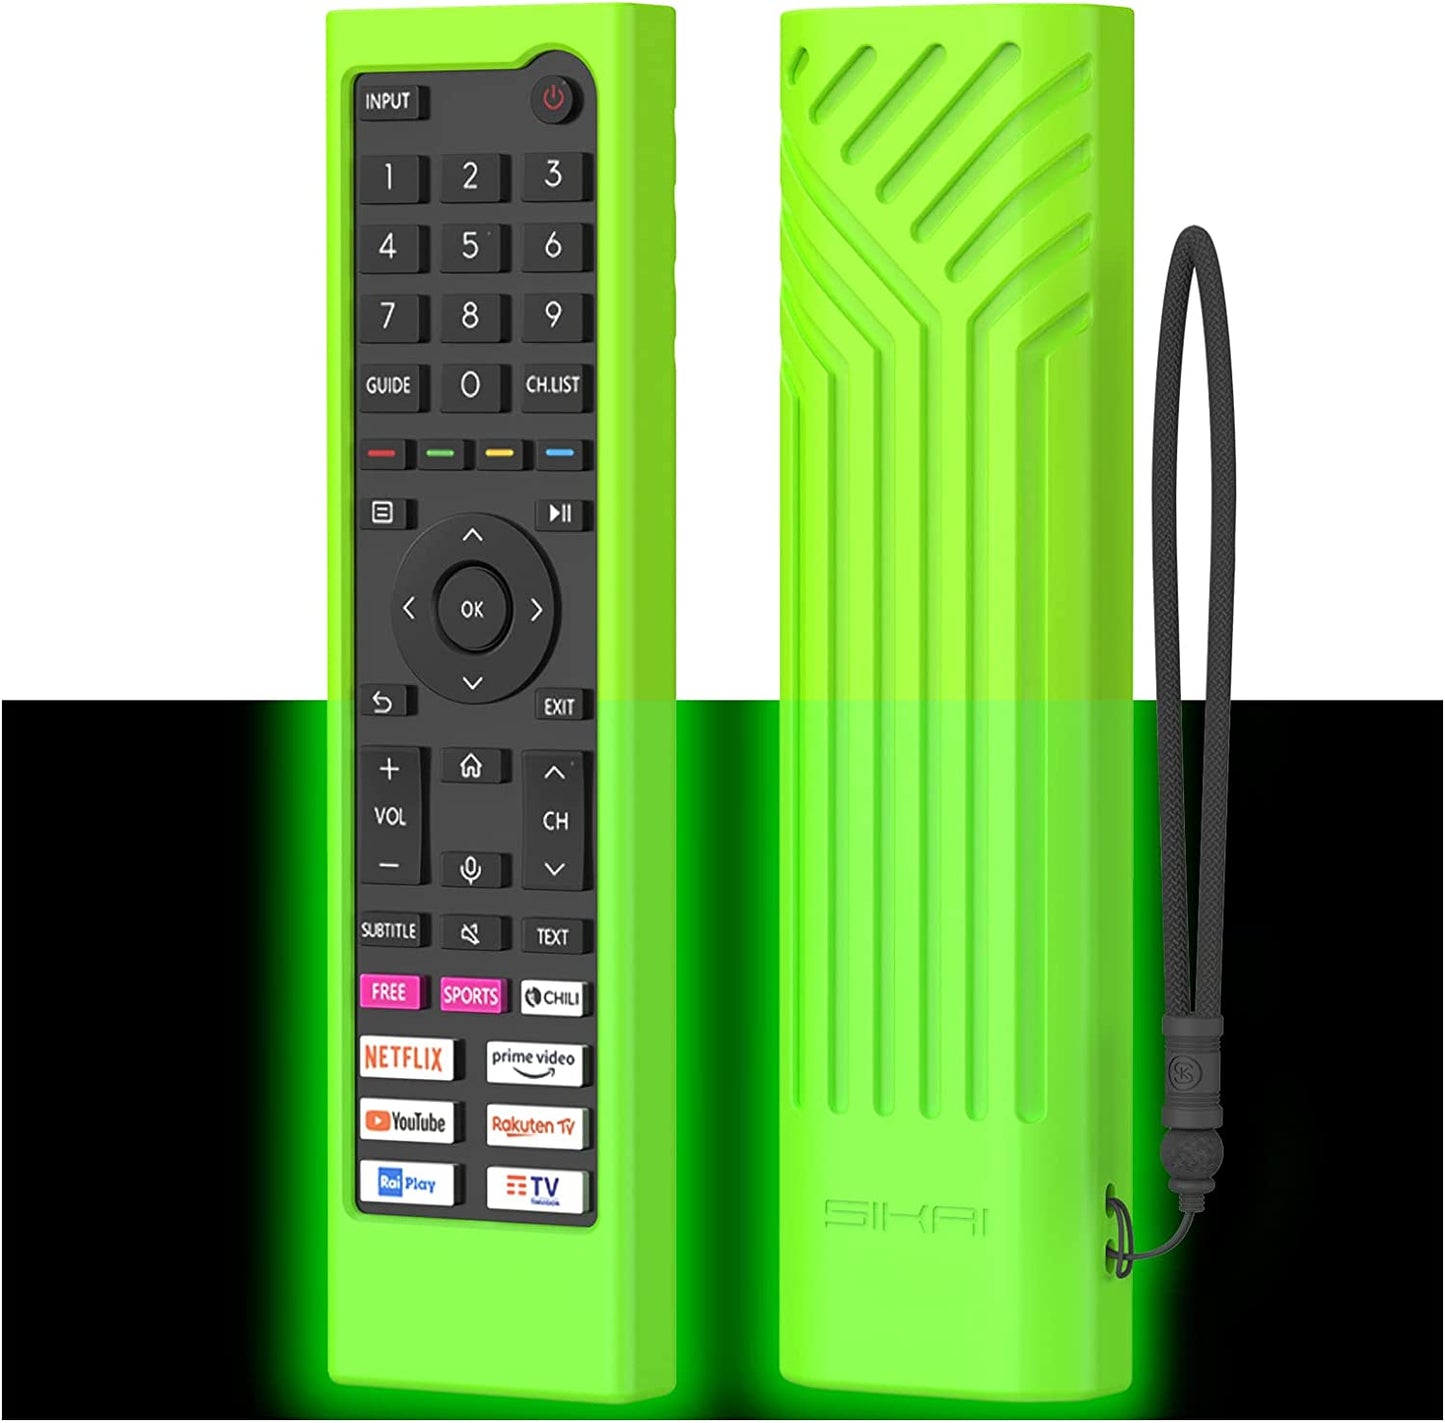 For Hisense TV Remote Control Protective Cover Compatible with Hisense ERF3C80H ERF3C80H(0012) Hisense QLED UHD 4K 2022 TV E78HQ A7GQ A6BG Remote Cover ERF3B80H ERF3D80H ERF3E80H,Anti-Slip Shell